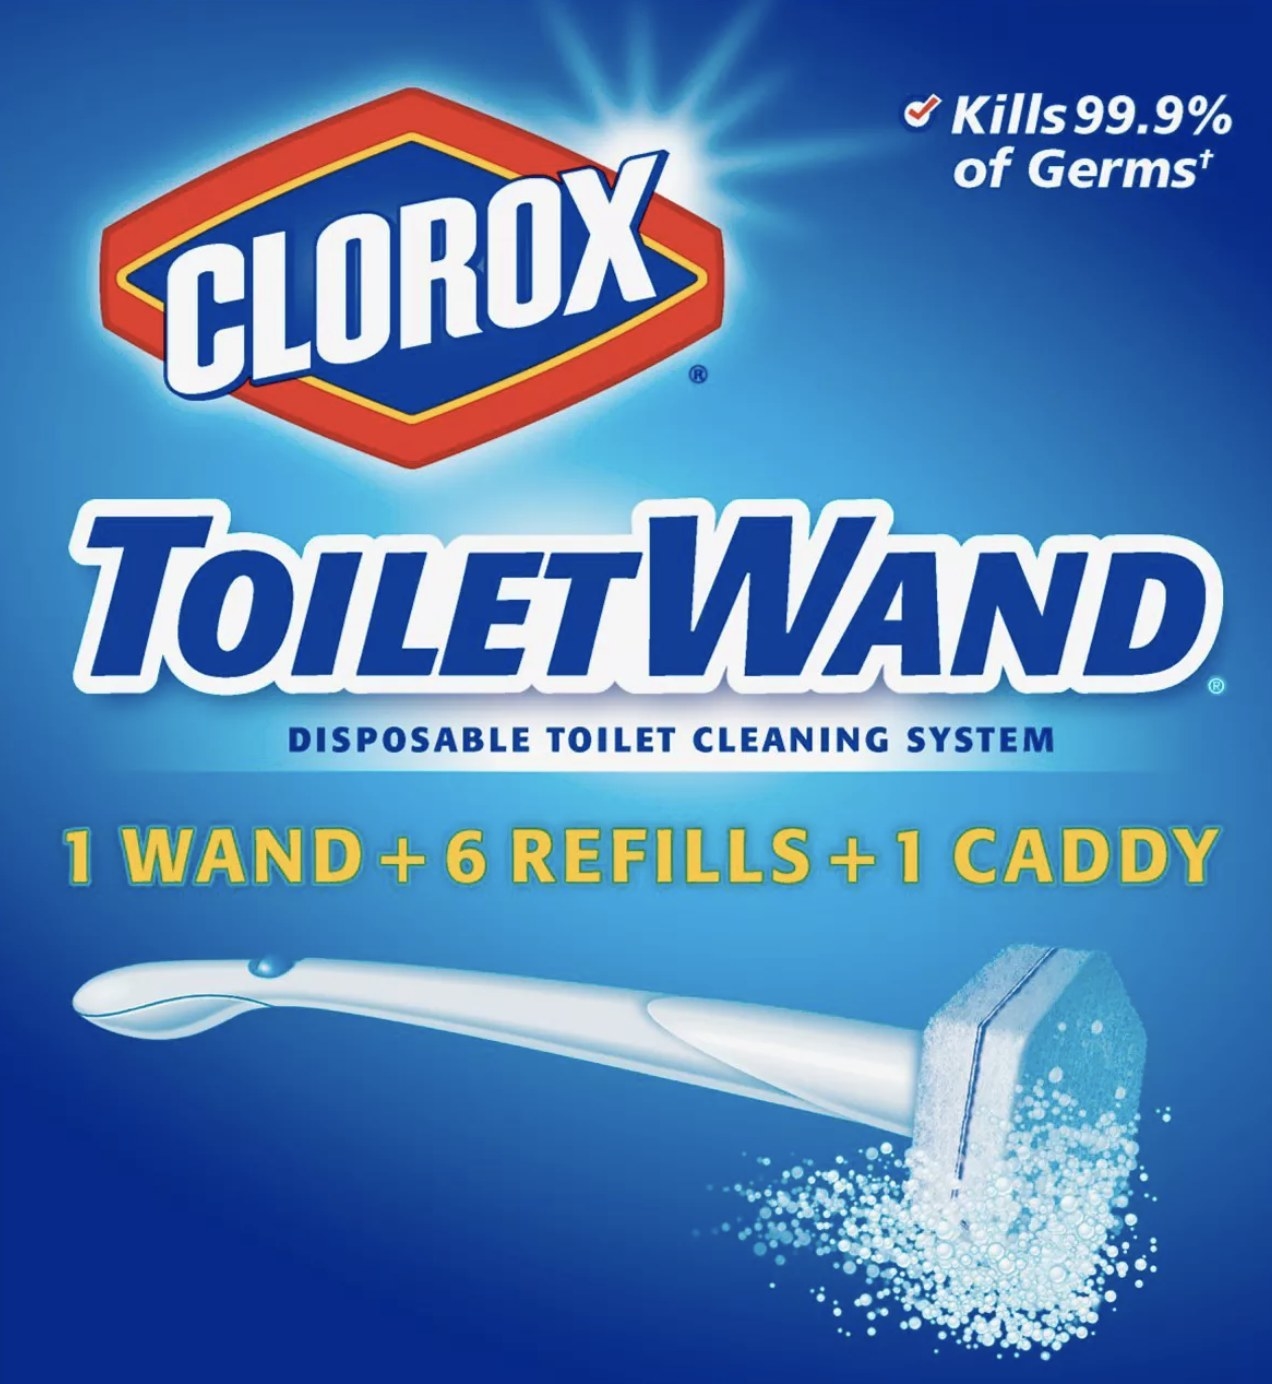 Box of Clorox ToiletWand Disposable Toilet Cleaning System